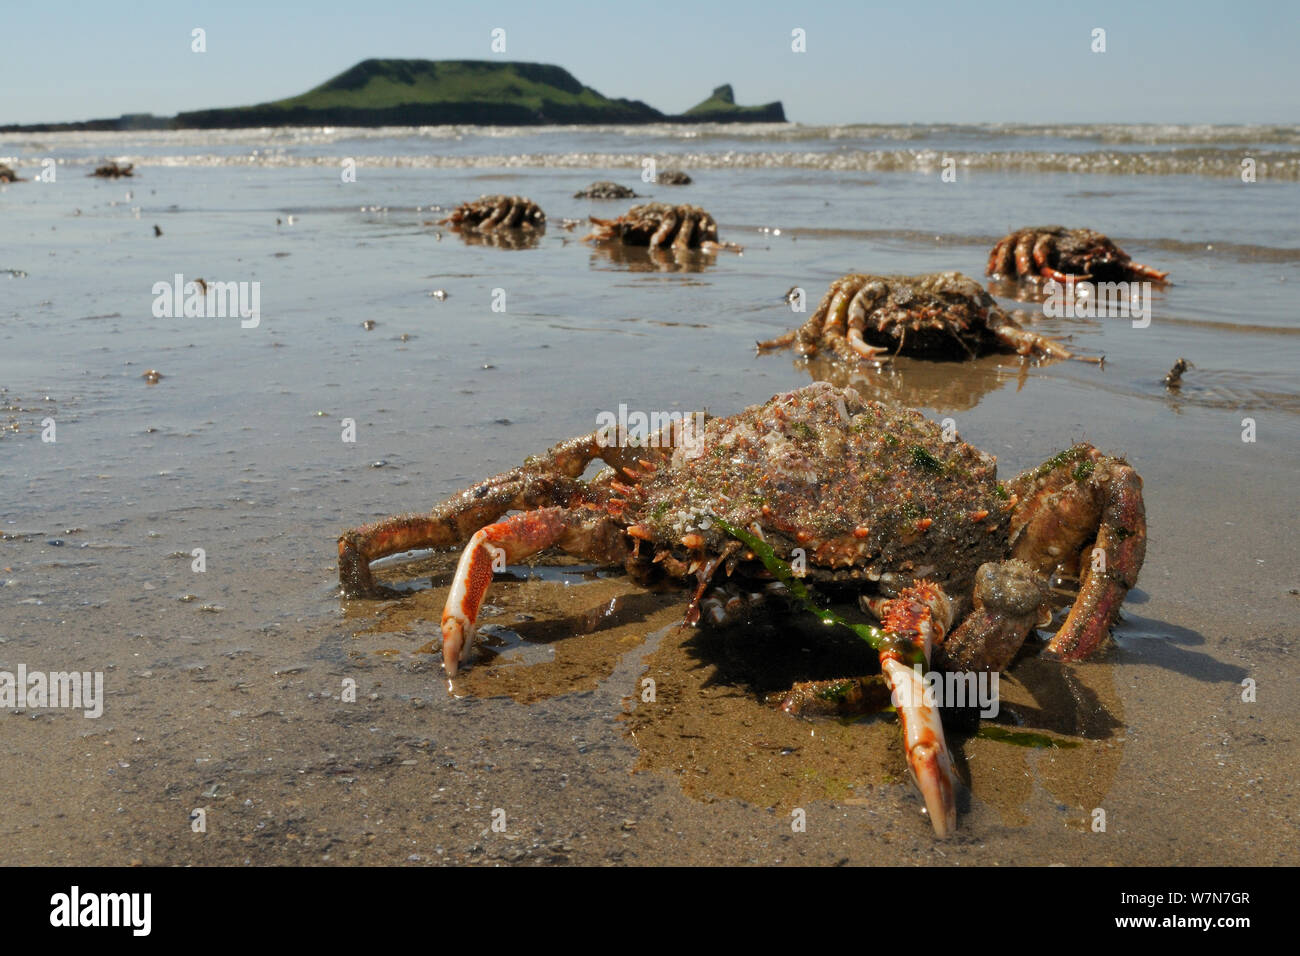 Moulted crarapaces and legs of Common spider crabs / Spiny spider crabs (Maja brachydactyla / Maja squinado) and moulted carapaces washed up on Rhossili Bay, with the Worm's Head in the background, The Gower Peninsula, UK, July. Stock Photo